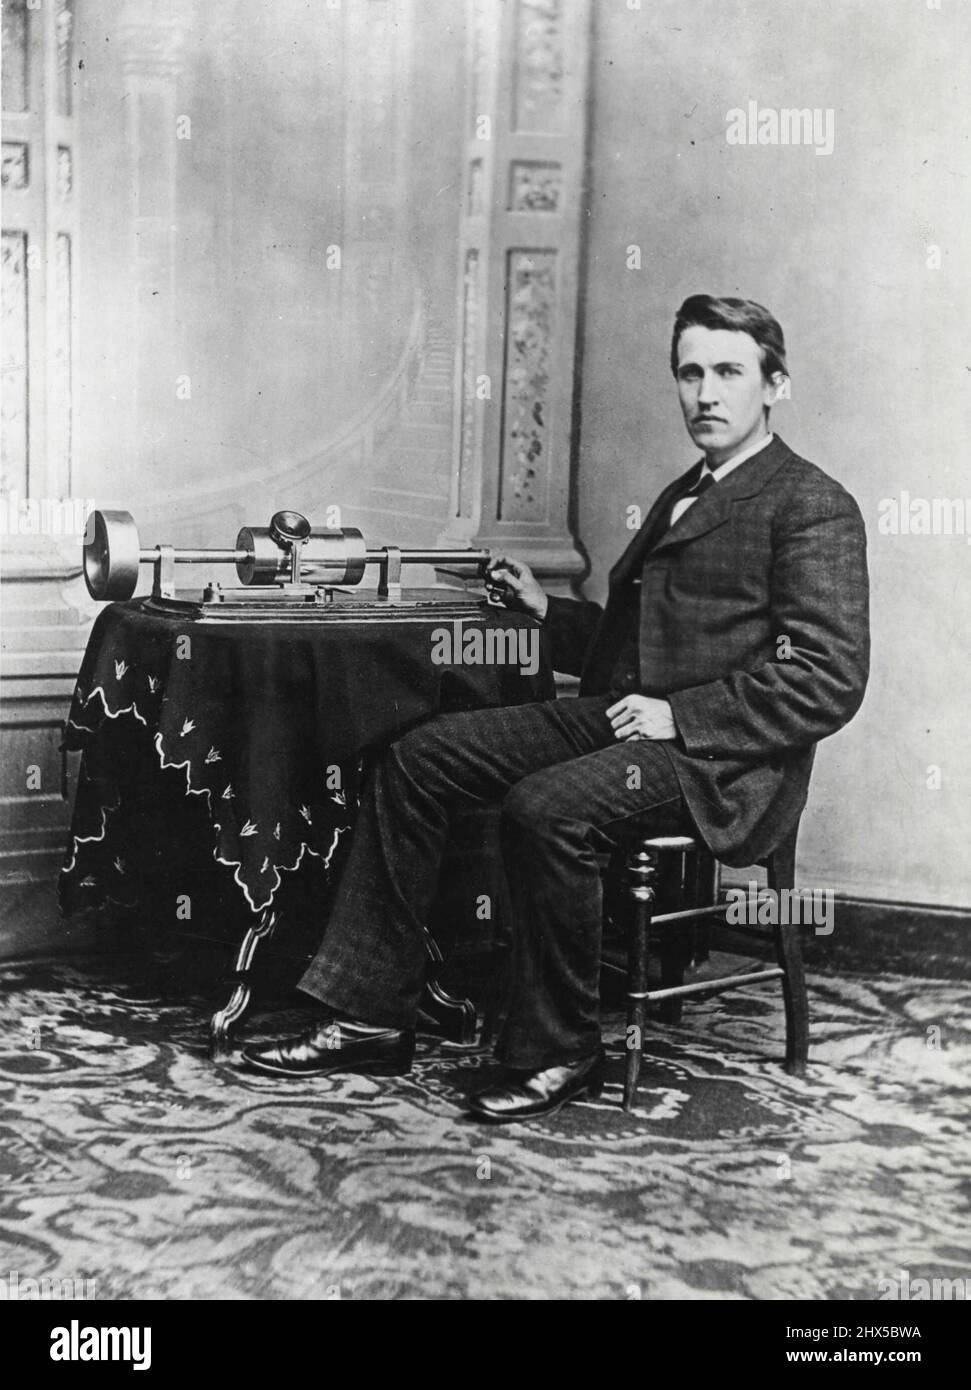 Thomas A. Edison, U.S. Inventor, Helped Develop World-Wide Industries -- Edison's favorite invention was the phonograph. In 1877 while working with an automatic telegraph, he noticed that the device began to hum musically when it was revolved swiftly. From this Edison perfected a method of recording sound vibrations that could be played back and amplified. Edison, then a young man, is shown with the tinfoil phonograph that he exhibited at the National Academy of Science in Washington. June 20, 1951. Stock Photo